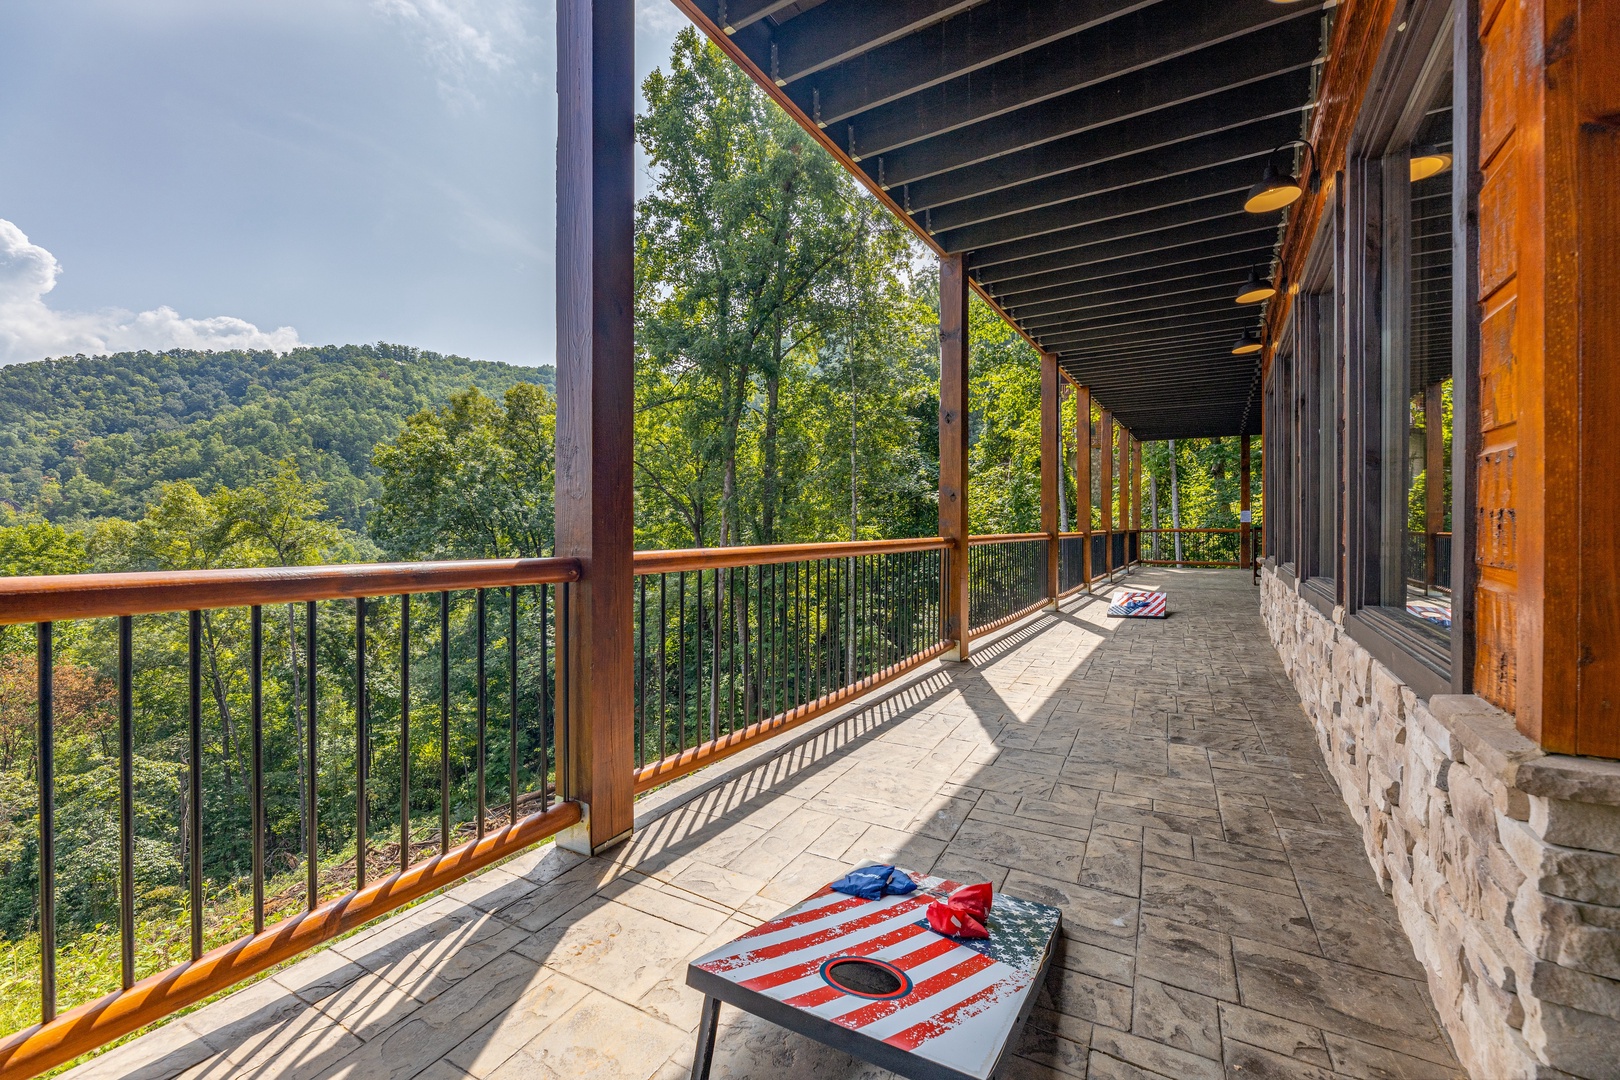 Cornhole game at Black Bears & Biscuits Lodge, a 6 bedroom cabin rental located in Pigeon Forge